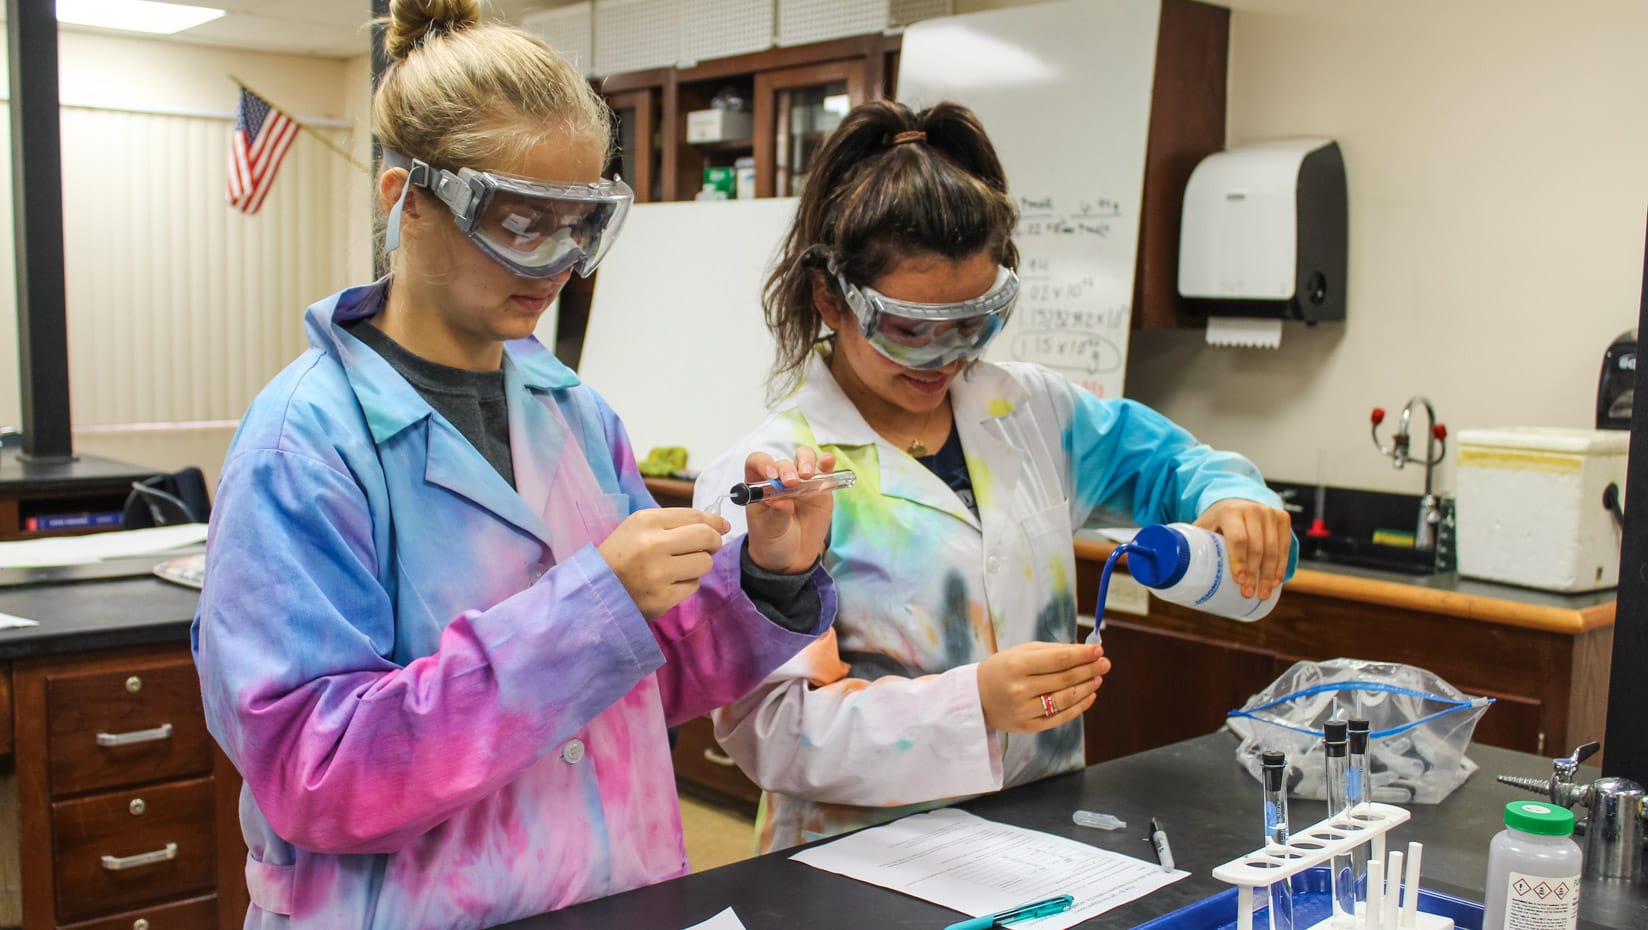 Two girls in chemistry class wearing protective gear